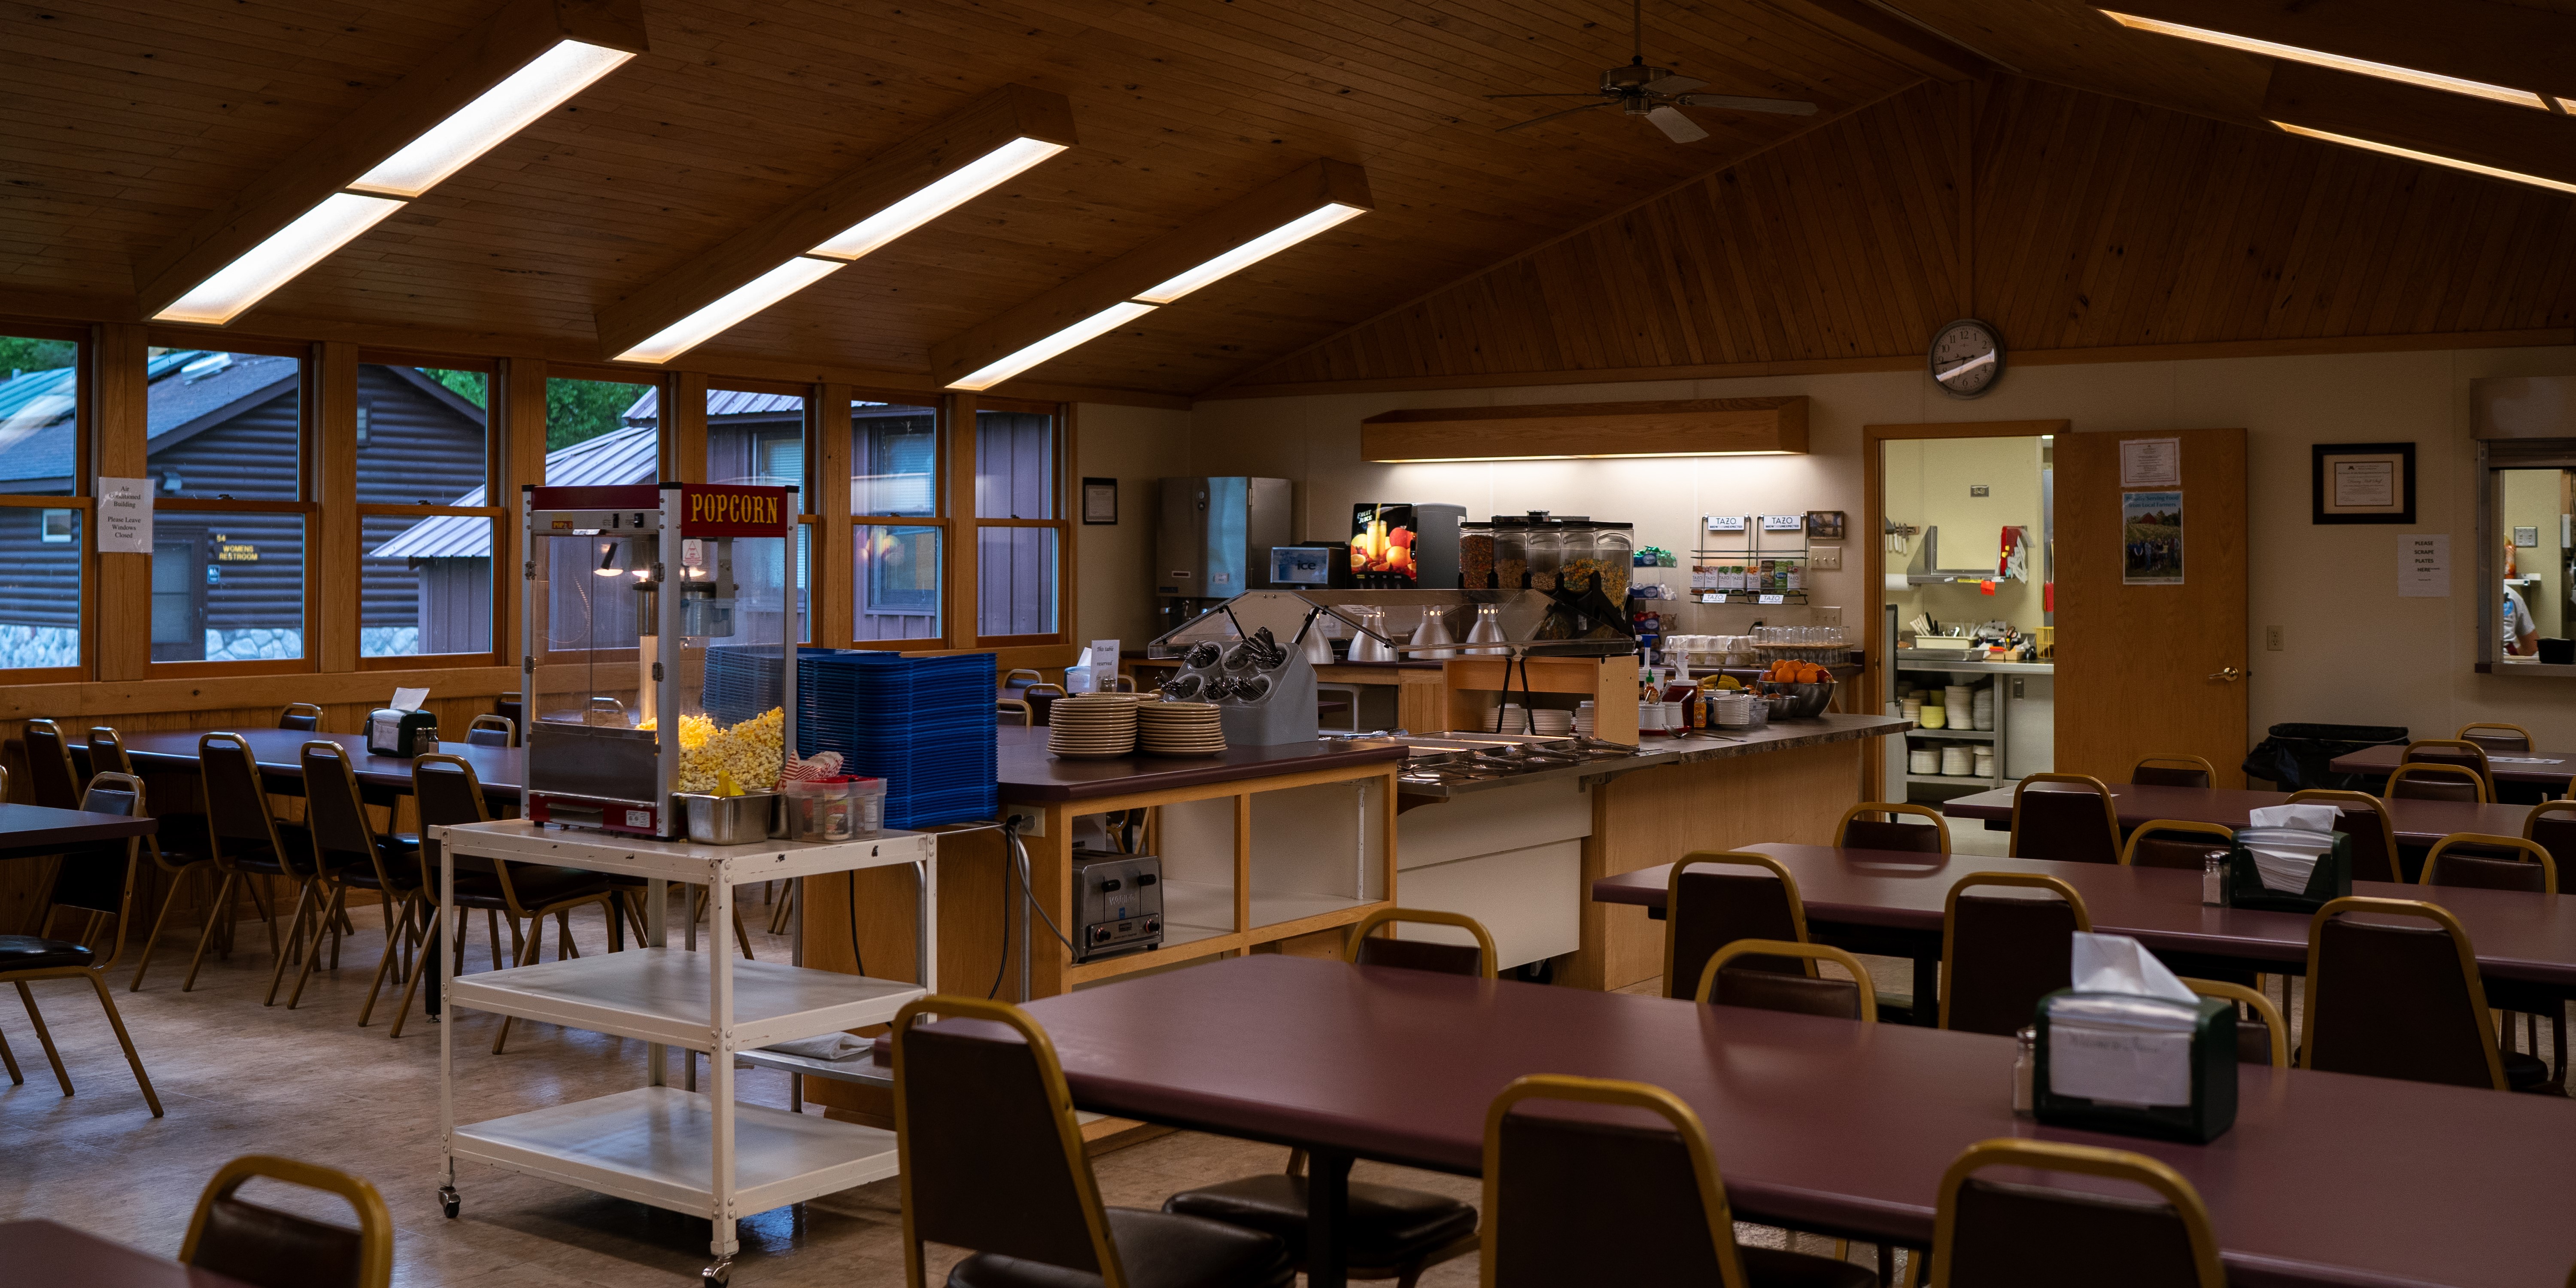 Interior view of the Itasca Station dining hall, showing the buffet line, drink counter, and tables